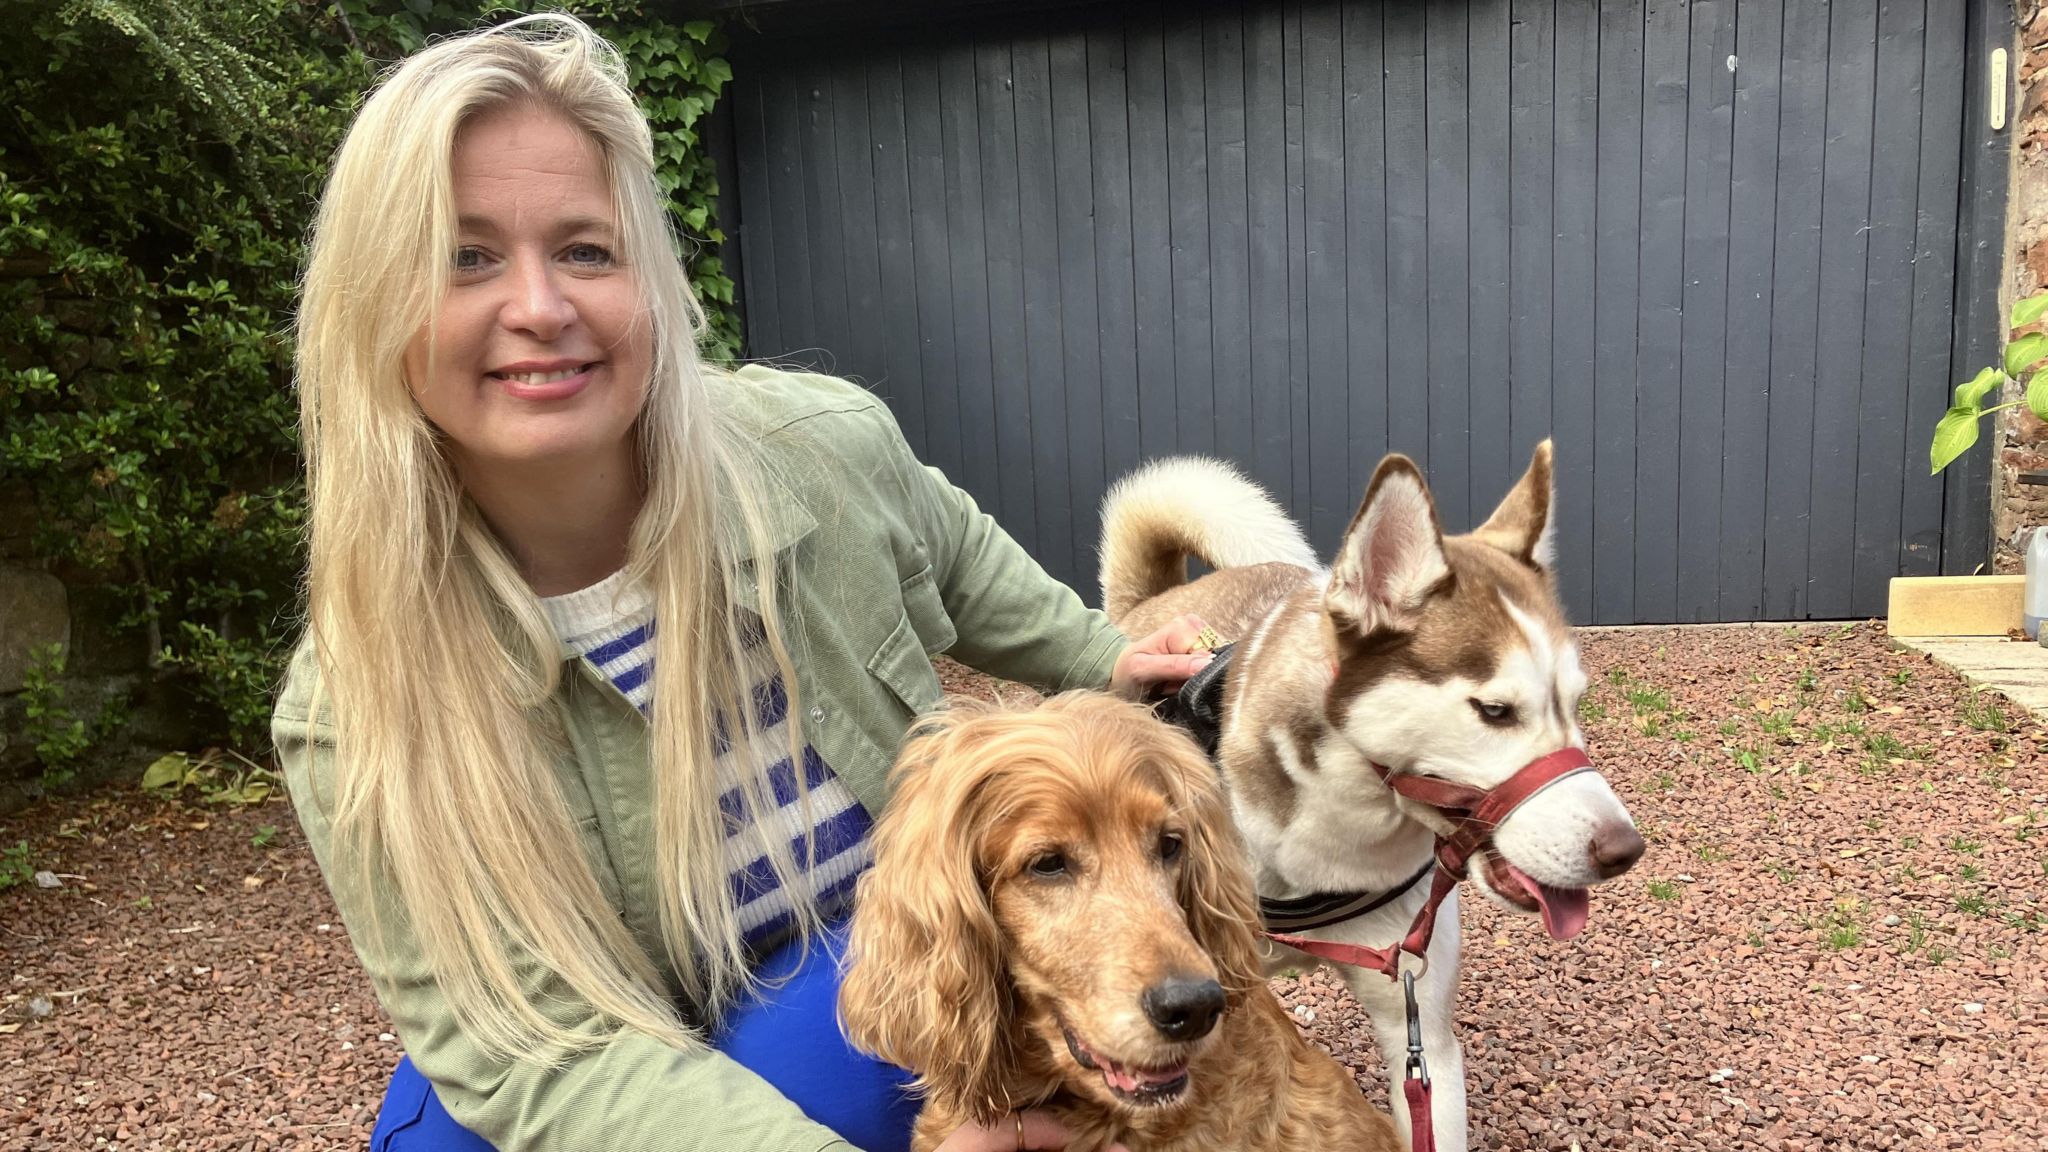 Woman with blond hair crouched down and posing with two dogs, one brown and the other white